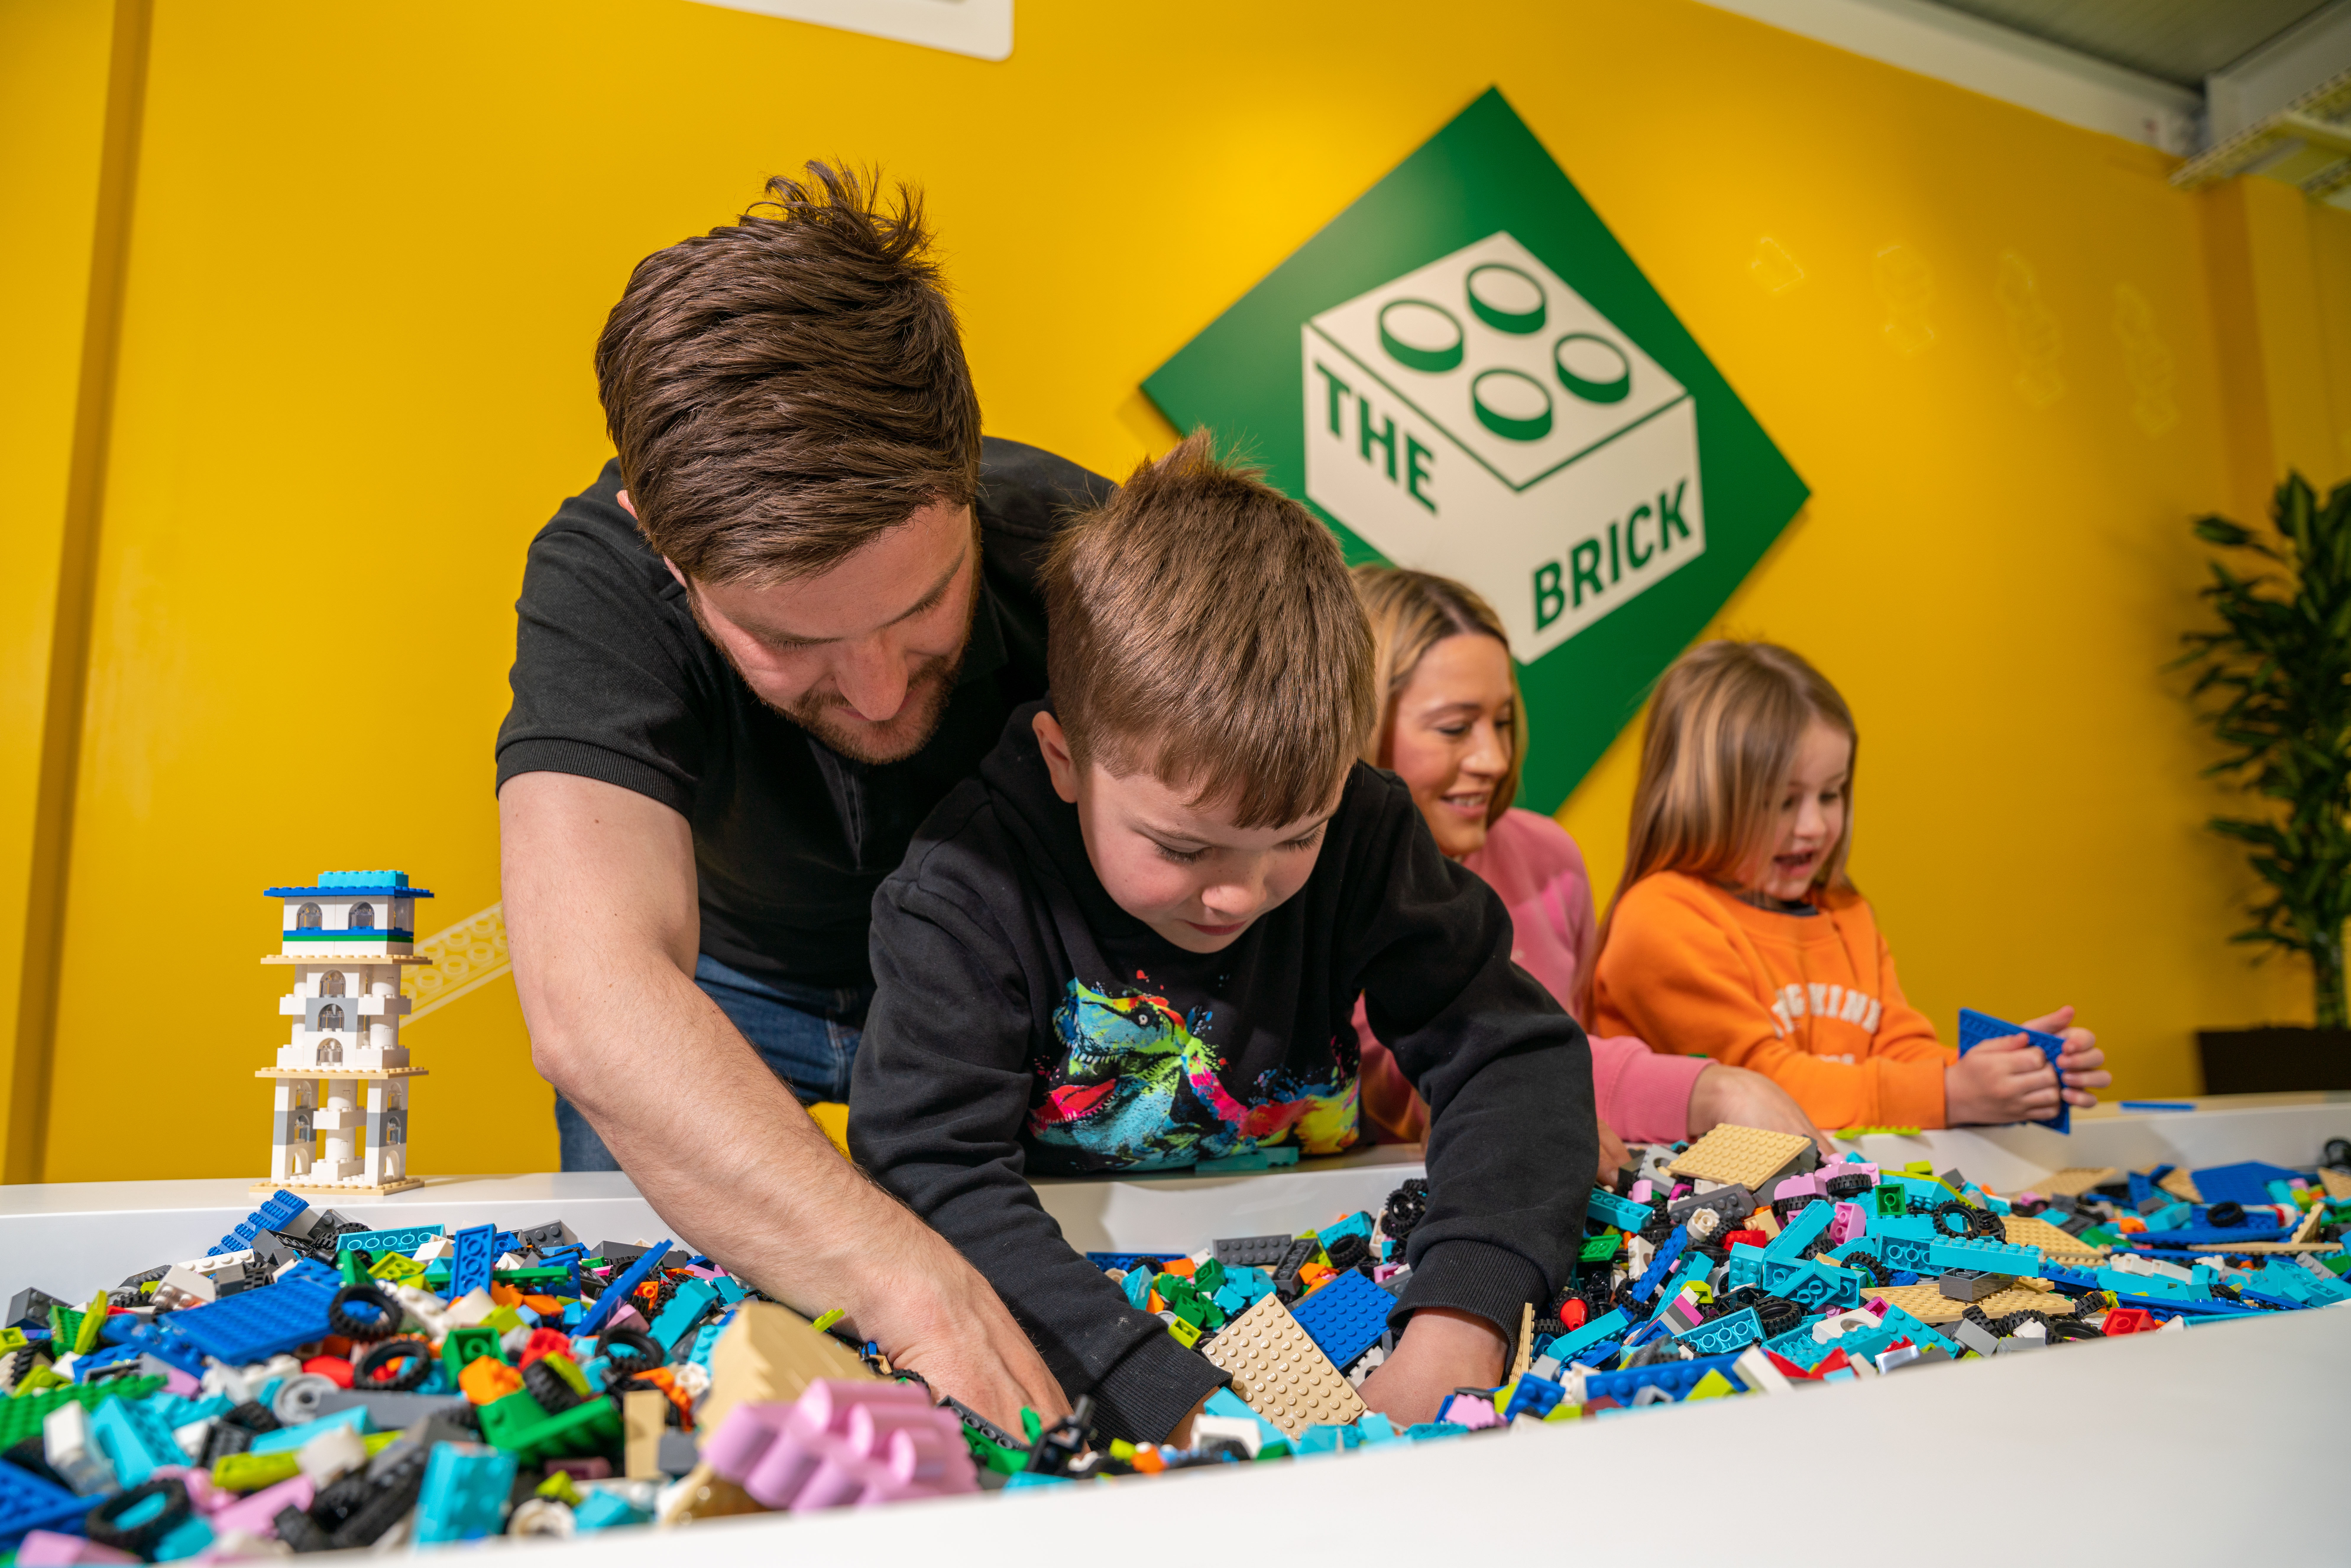 Family Building In The Brick At The LEGOLAND Windsor Resort